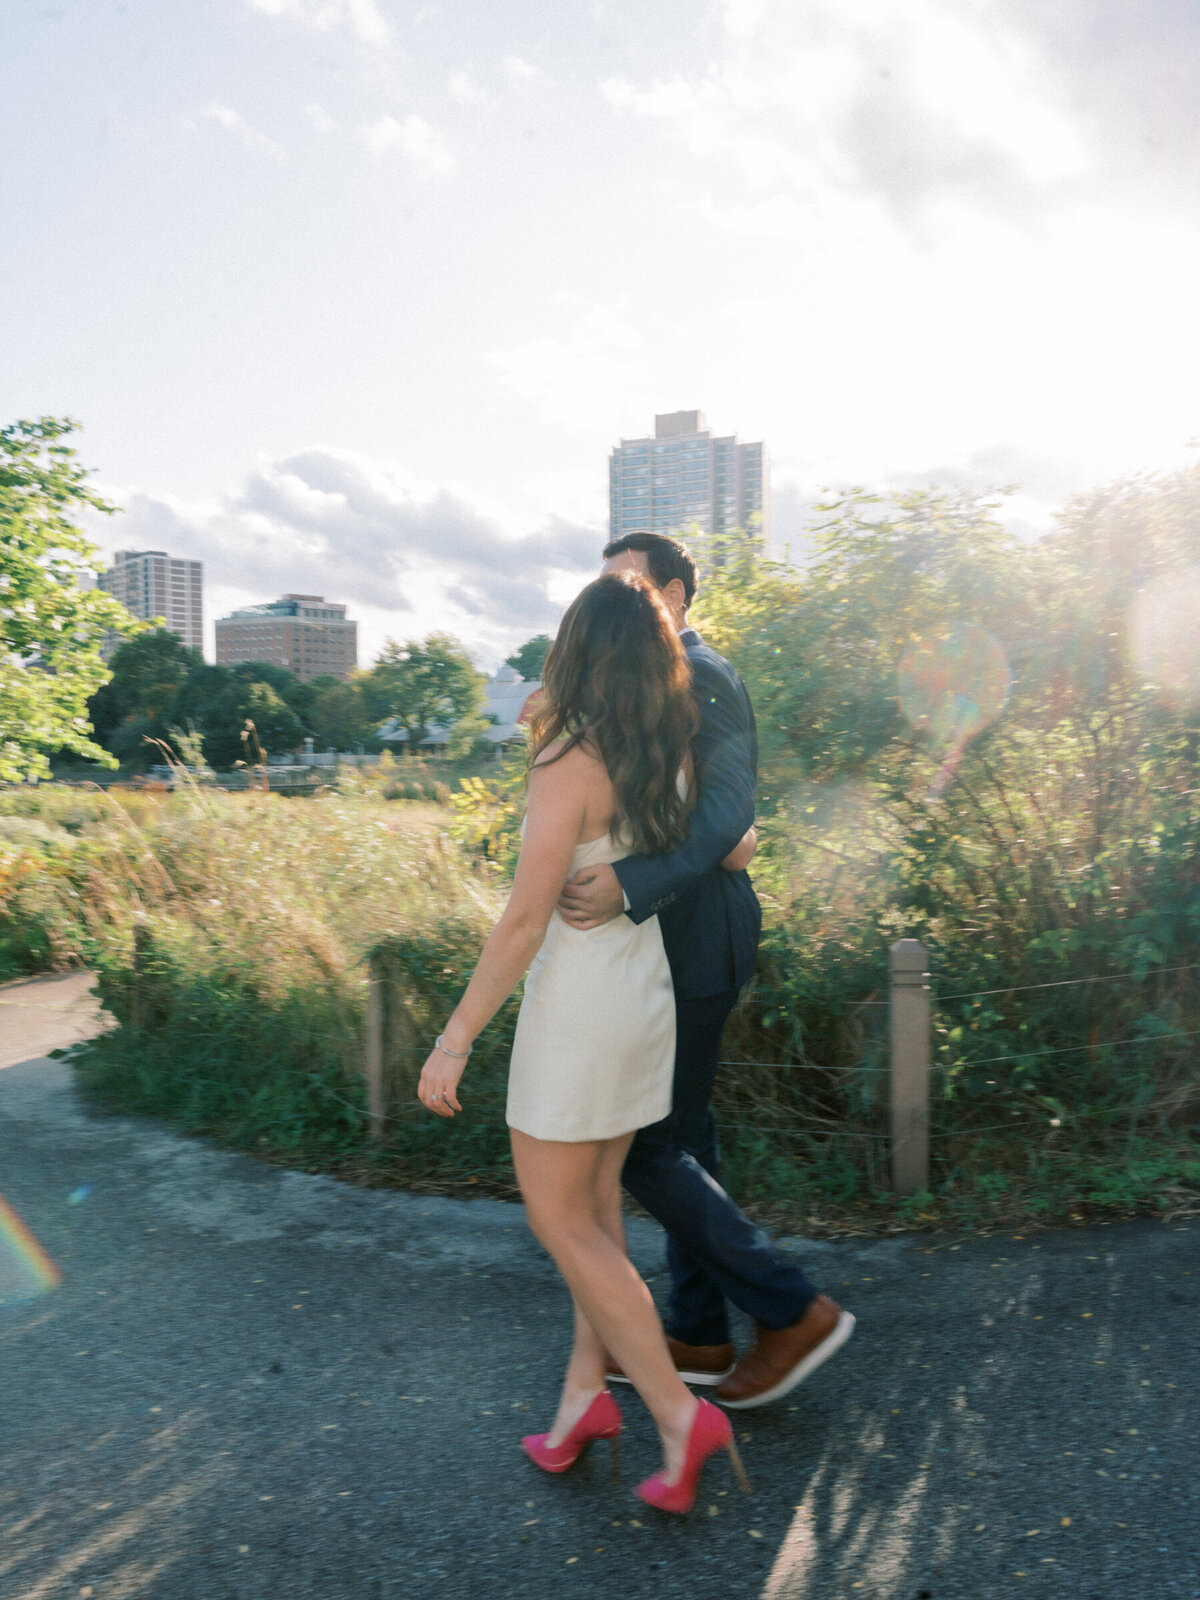 Lincoln Park Chicago Fall Engagement Session Highlights | Amarachi Ikeji Photography 27